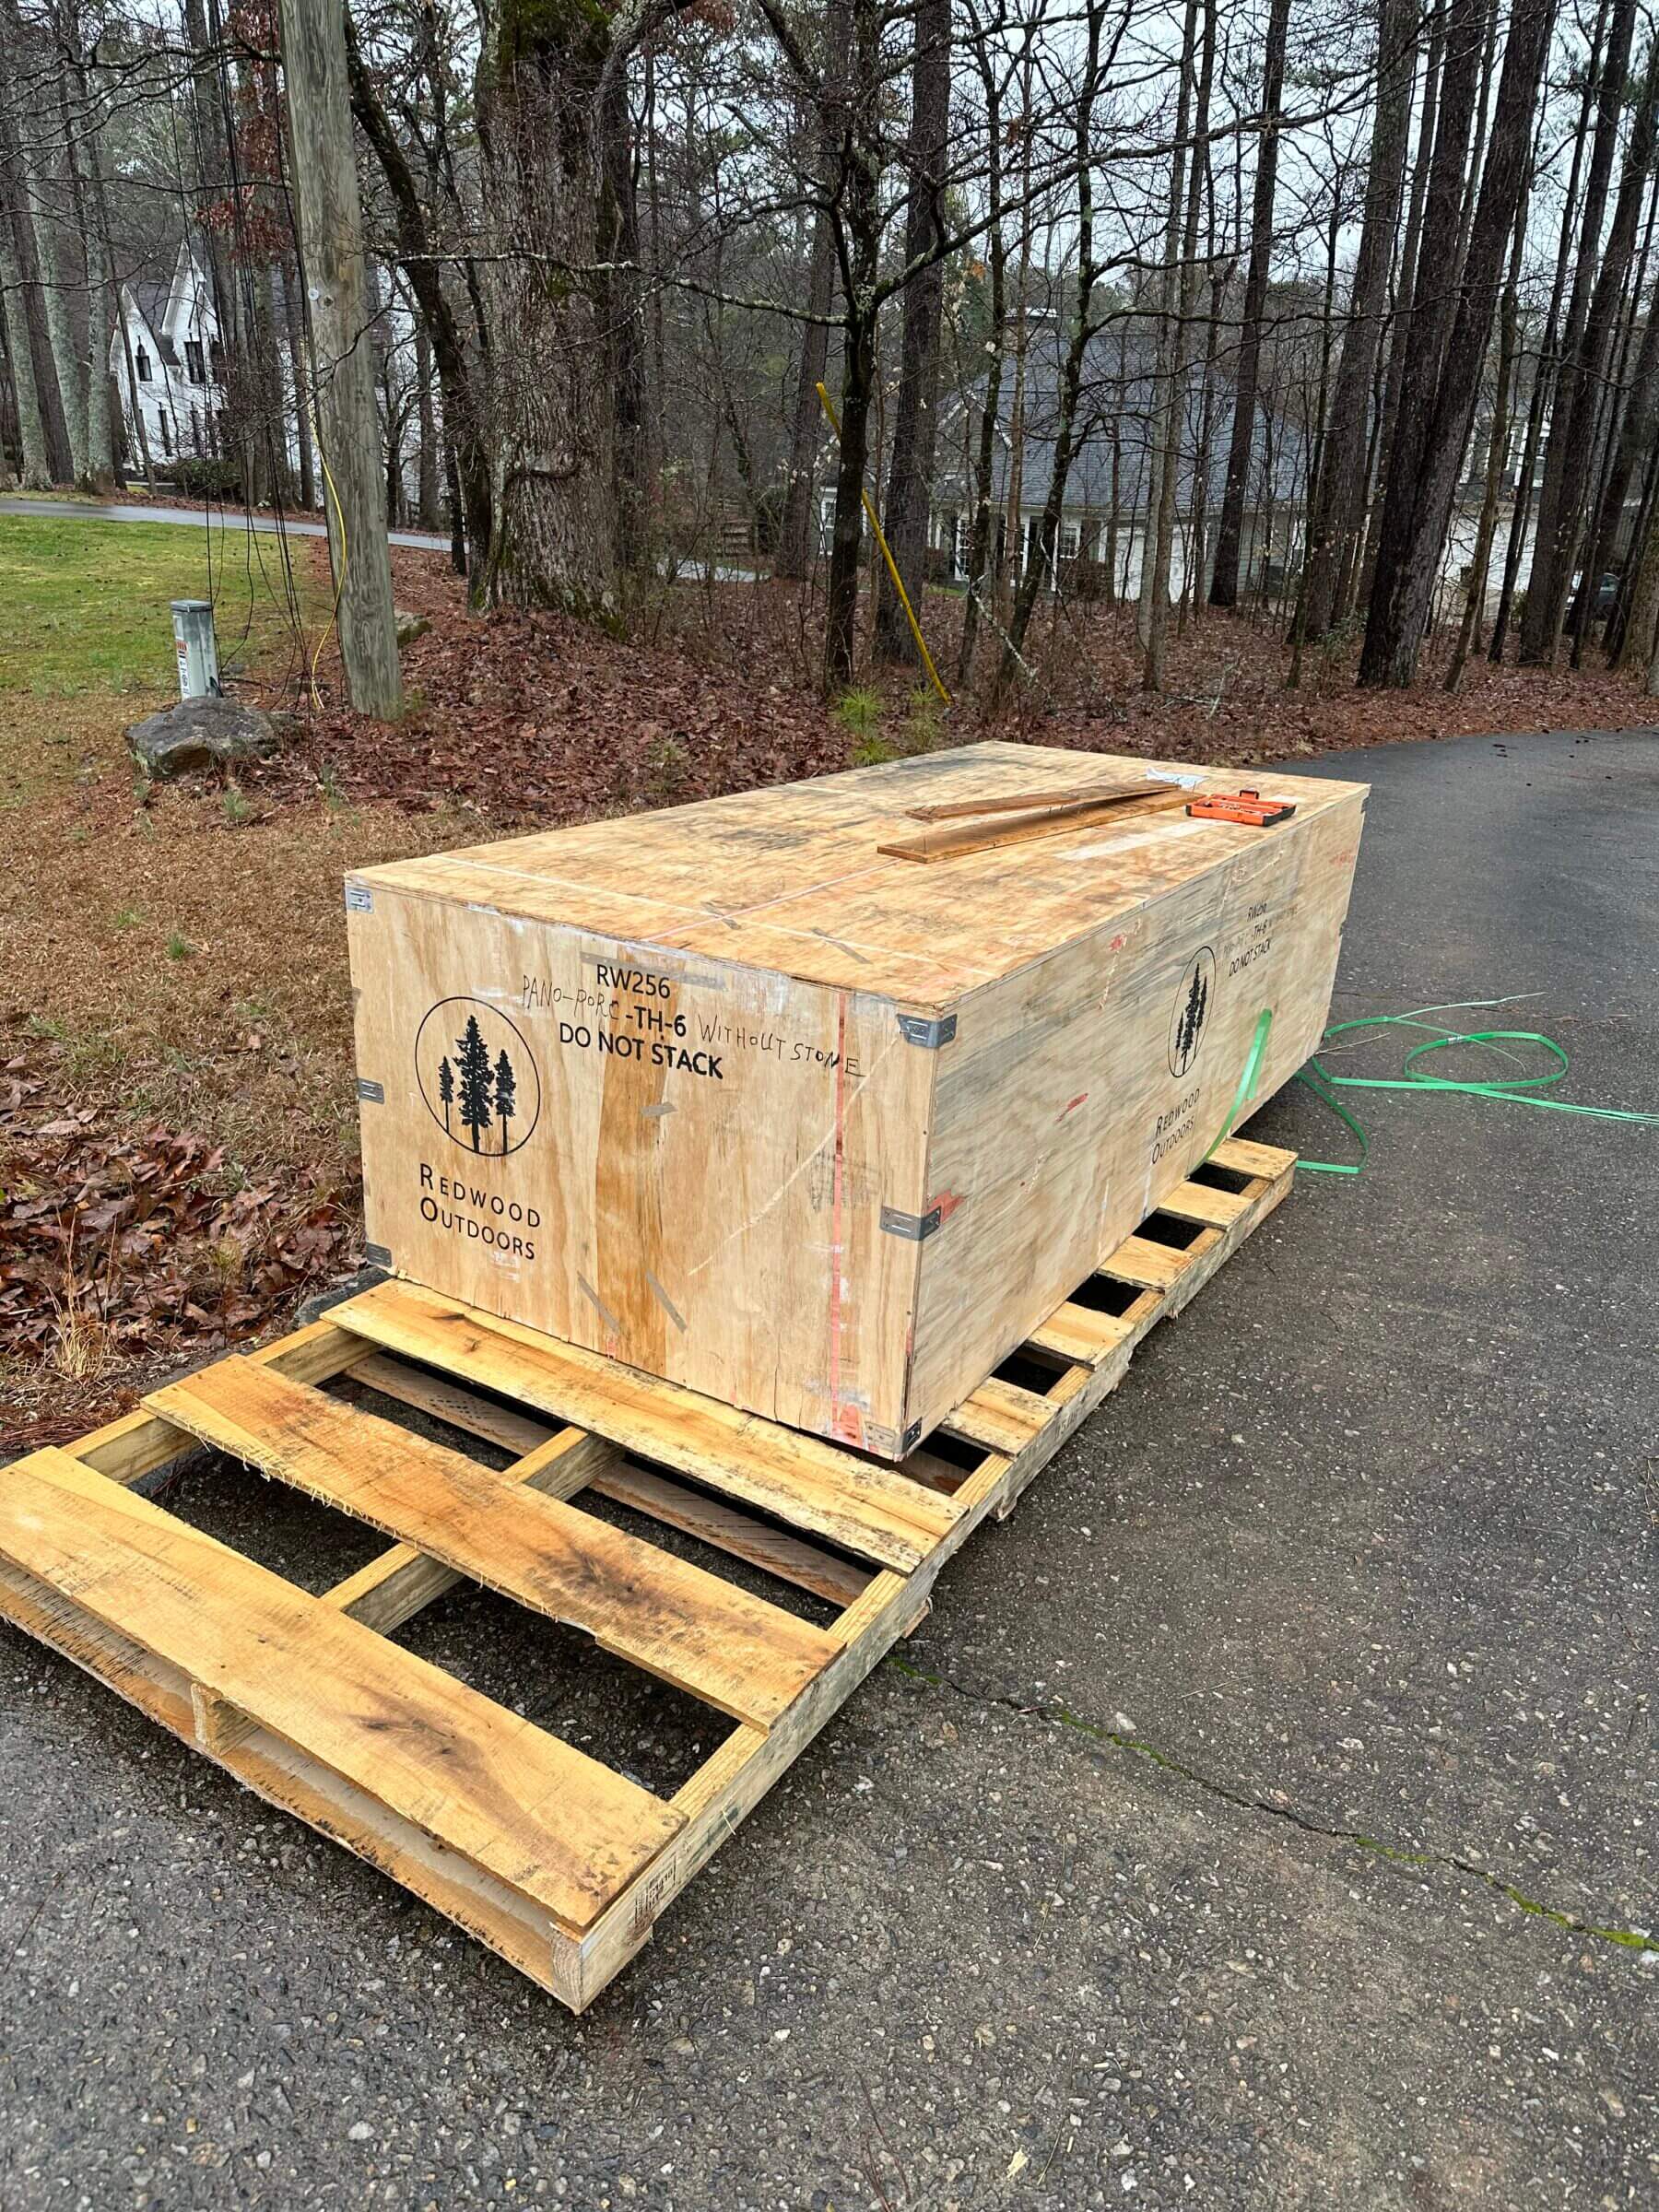 The truck driver who delivered our wet sauna dropped off this 800 pound crate in our driveway